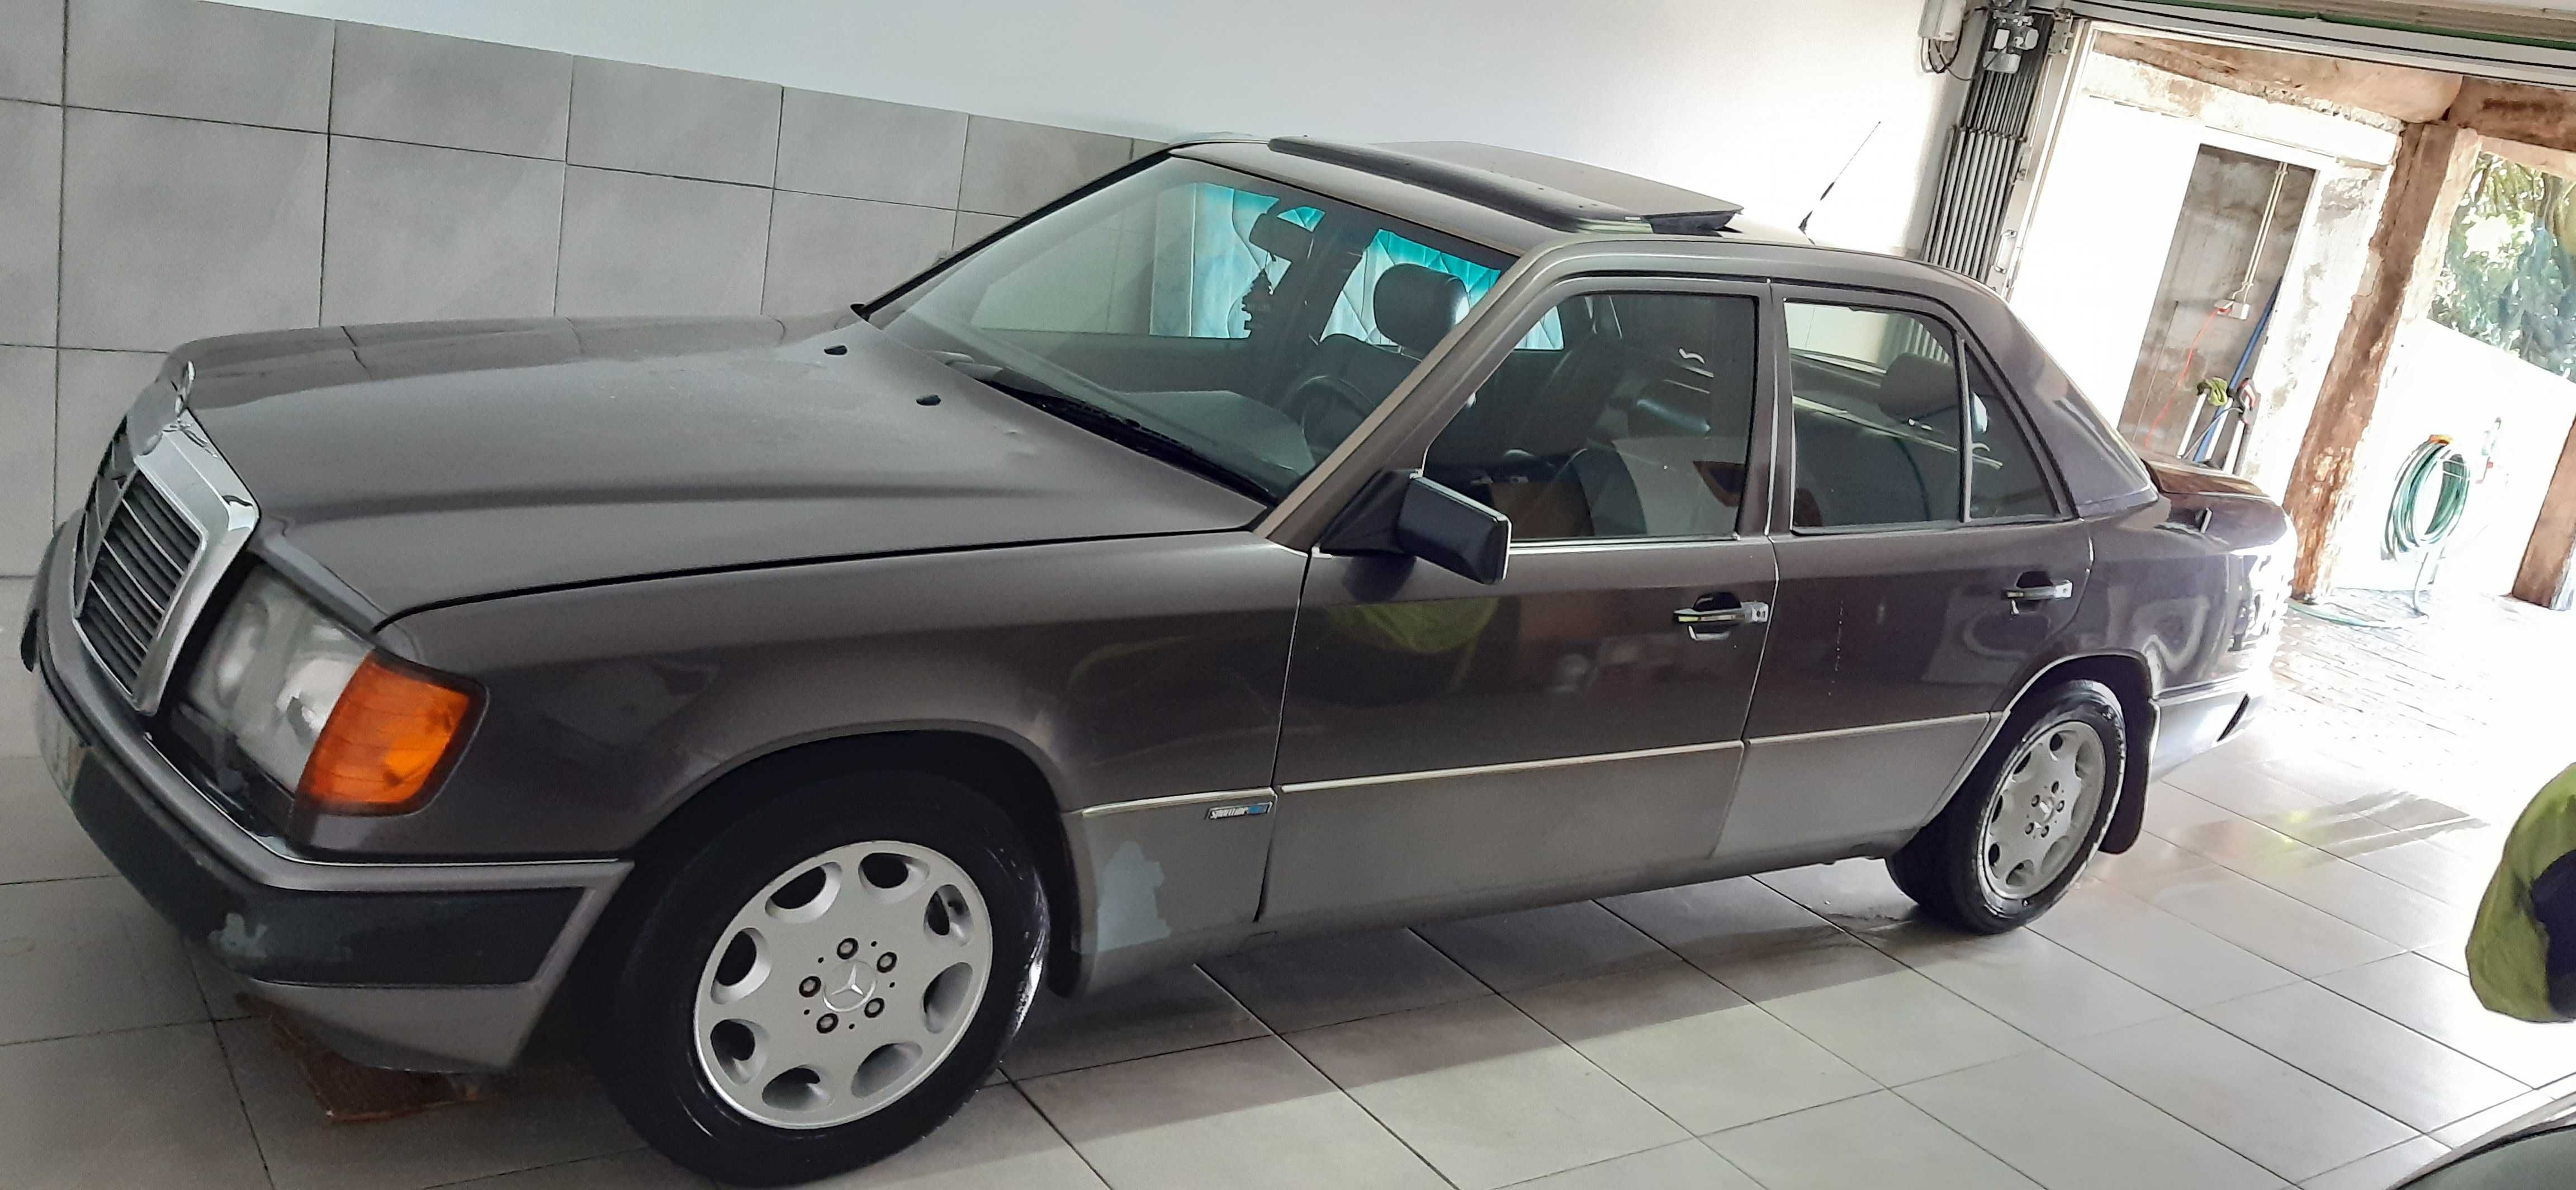 Judgment Suppose diary Mercedes w124, 250 2.5 Turbo D Sportline Espinho • OLX Portugal